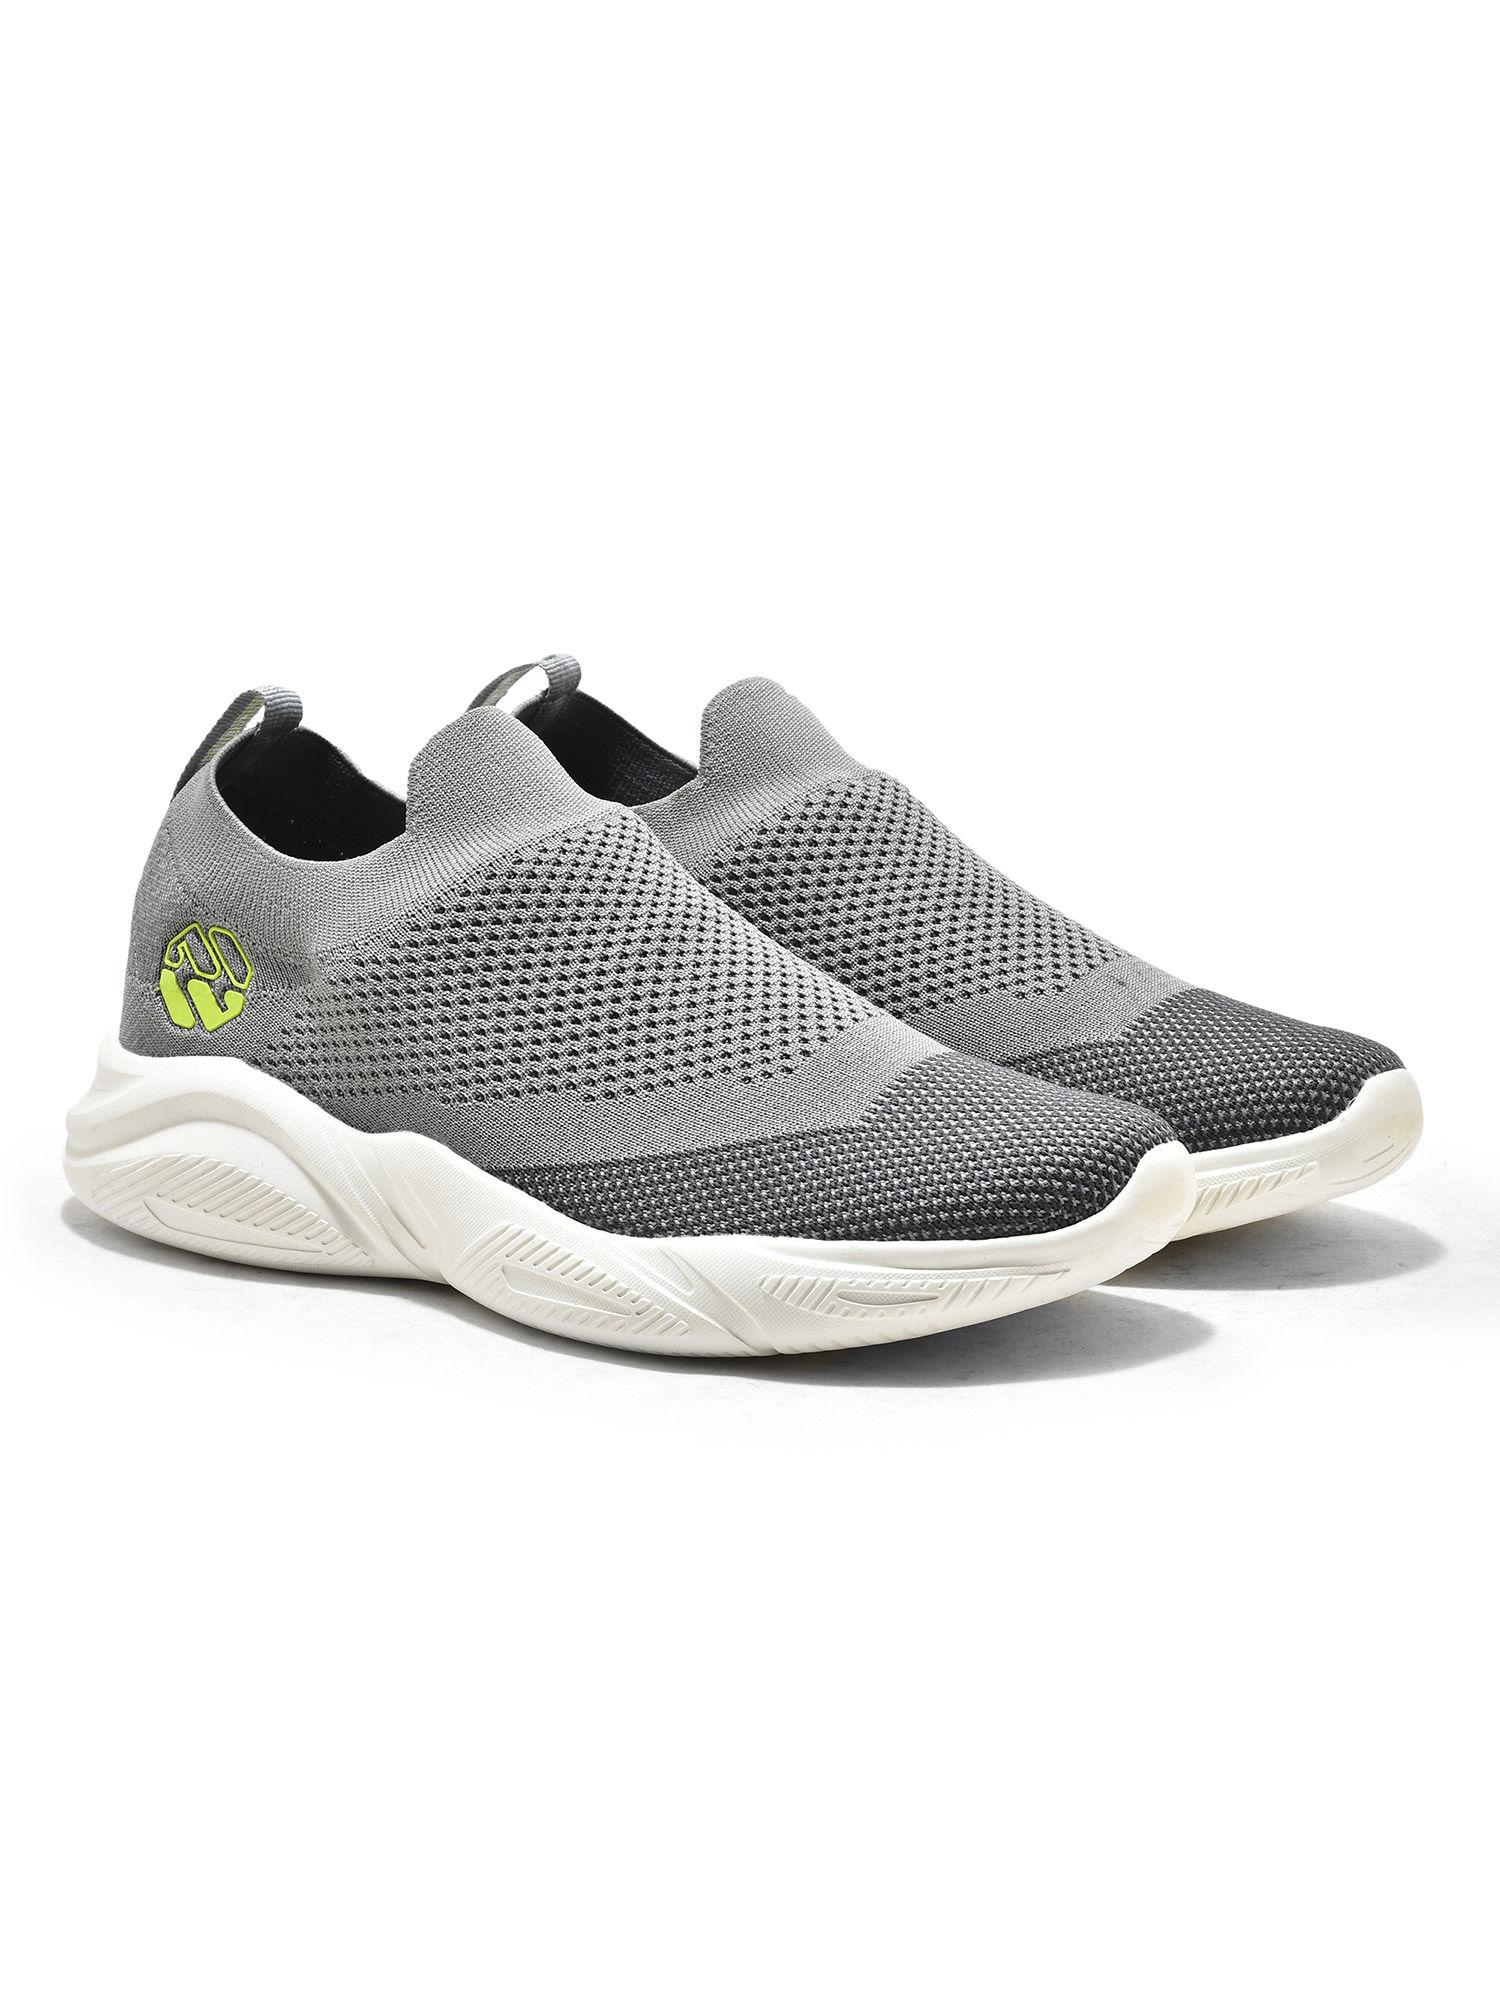 mens grey sports shoes